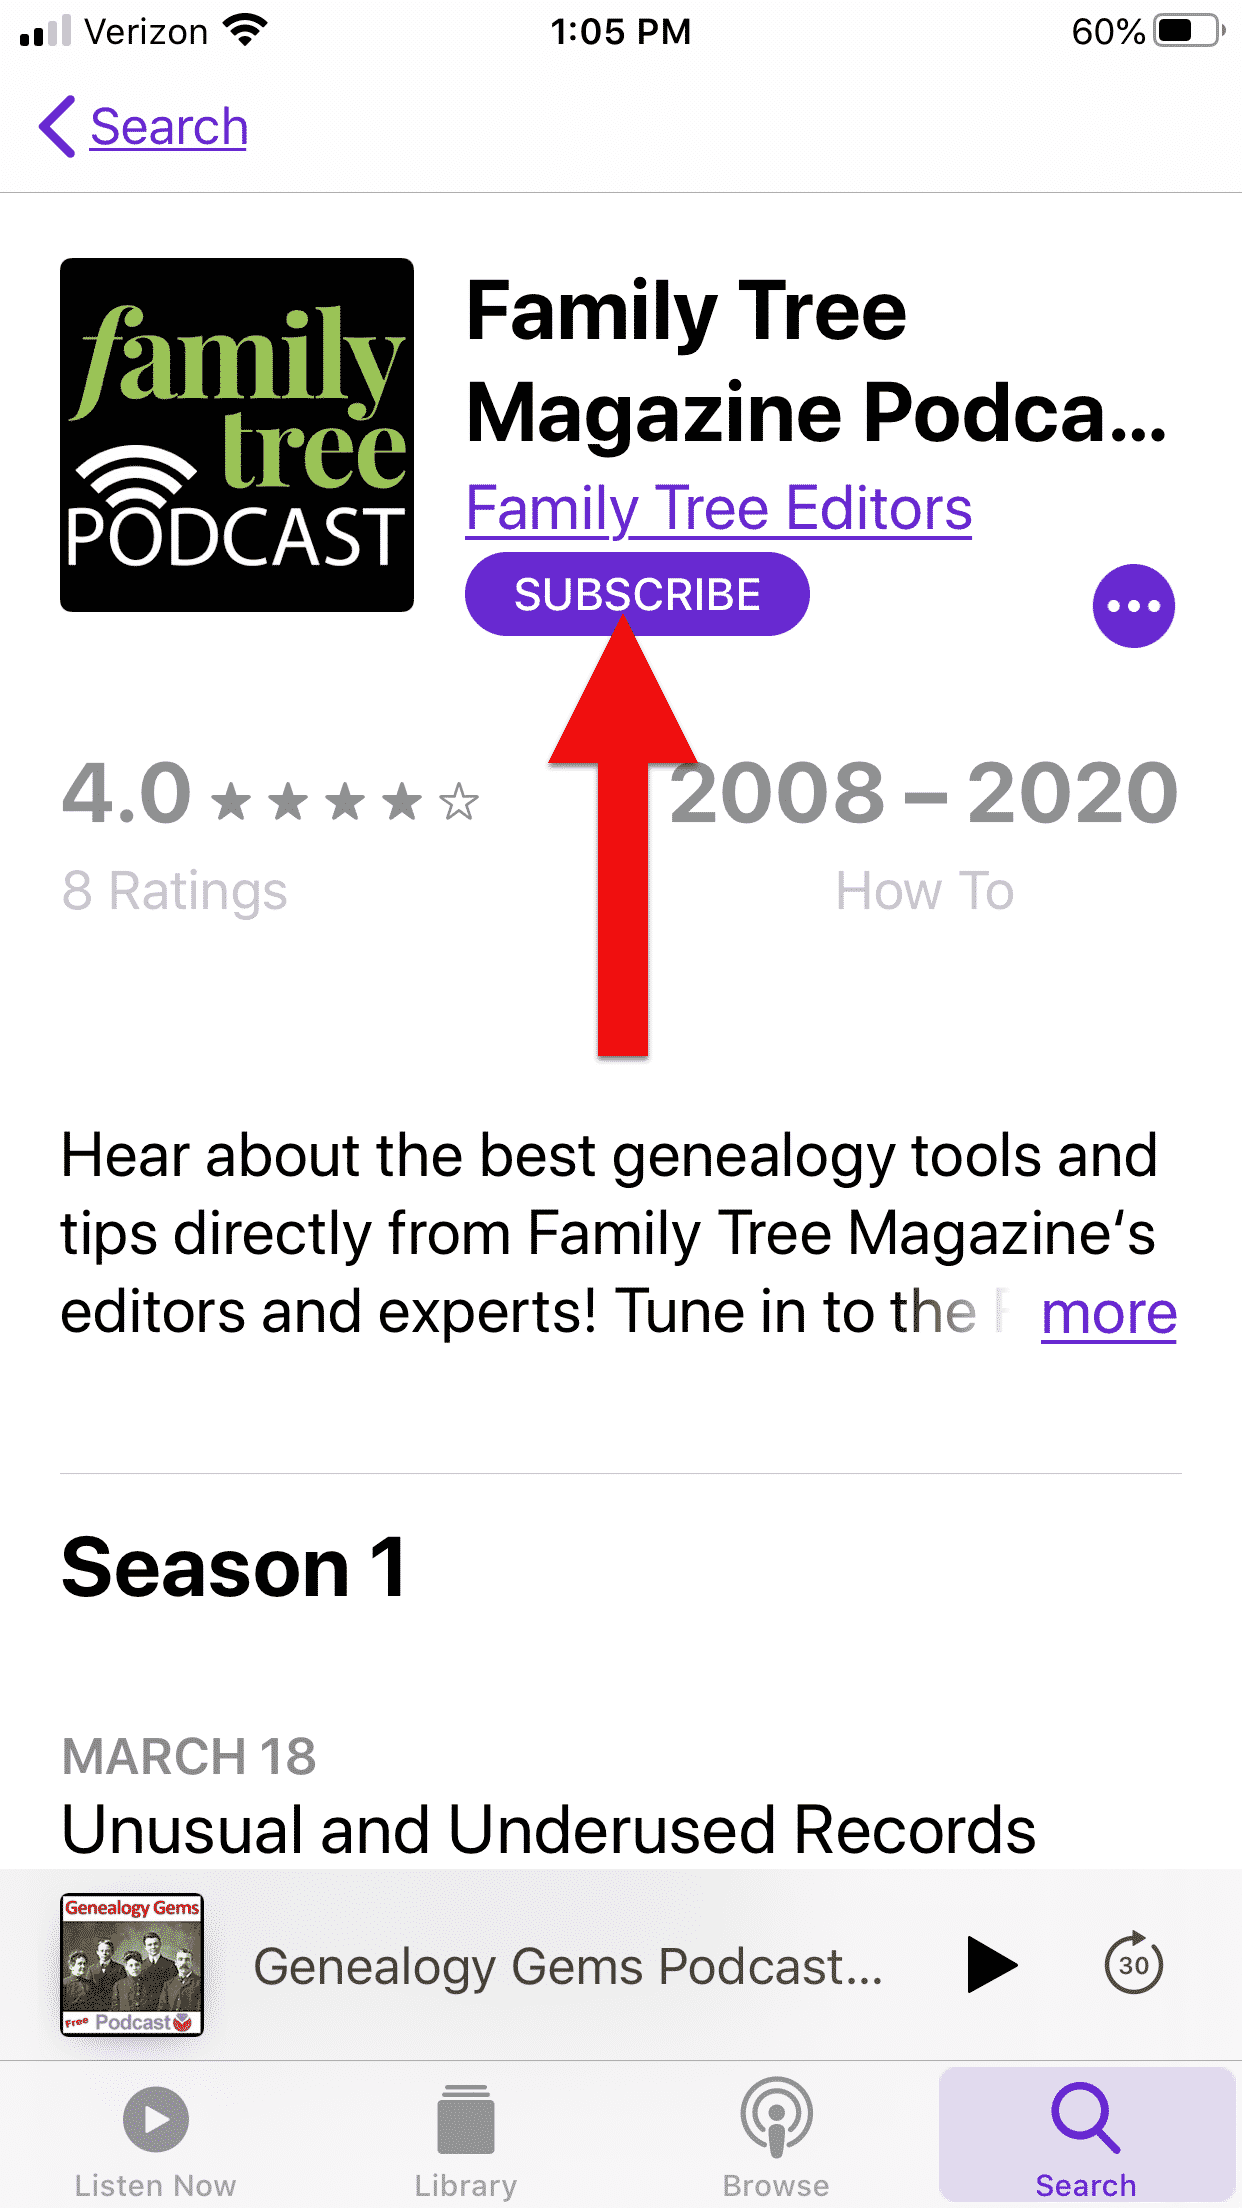 Screenshot of Apple podcast app with red arrow pointing to Subscribe button for Family Tree Magazine podcast.